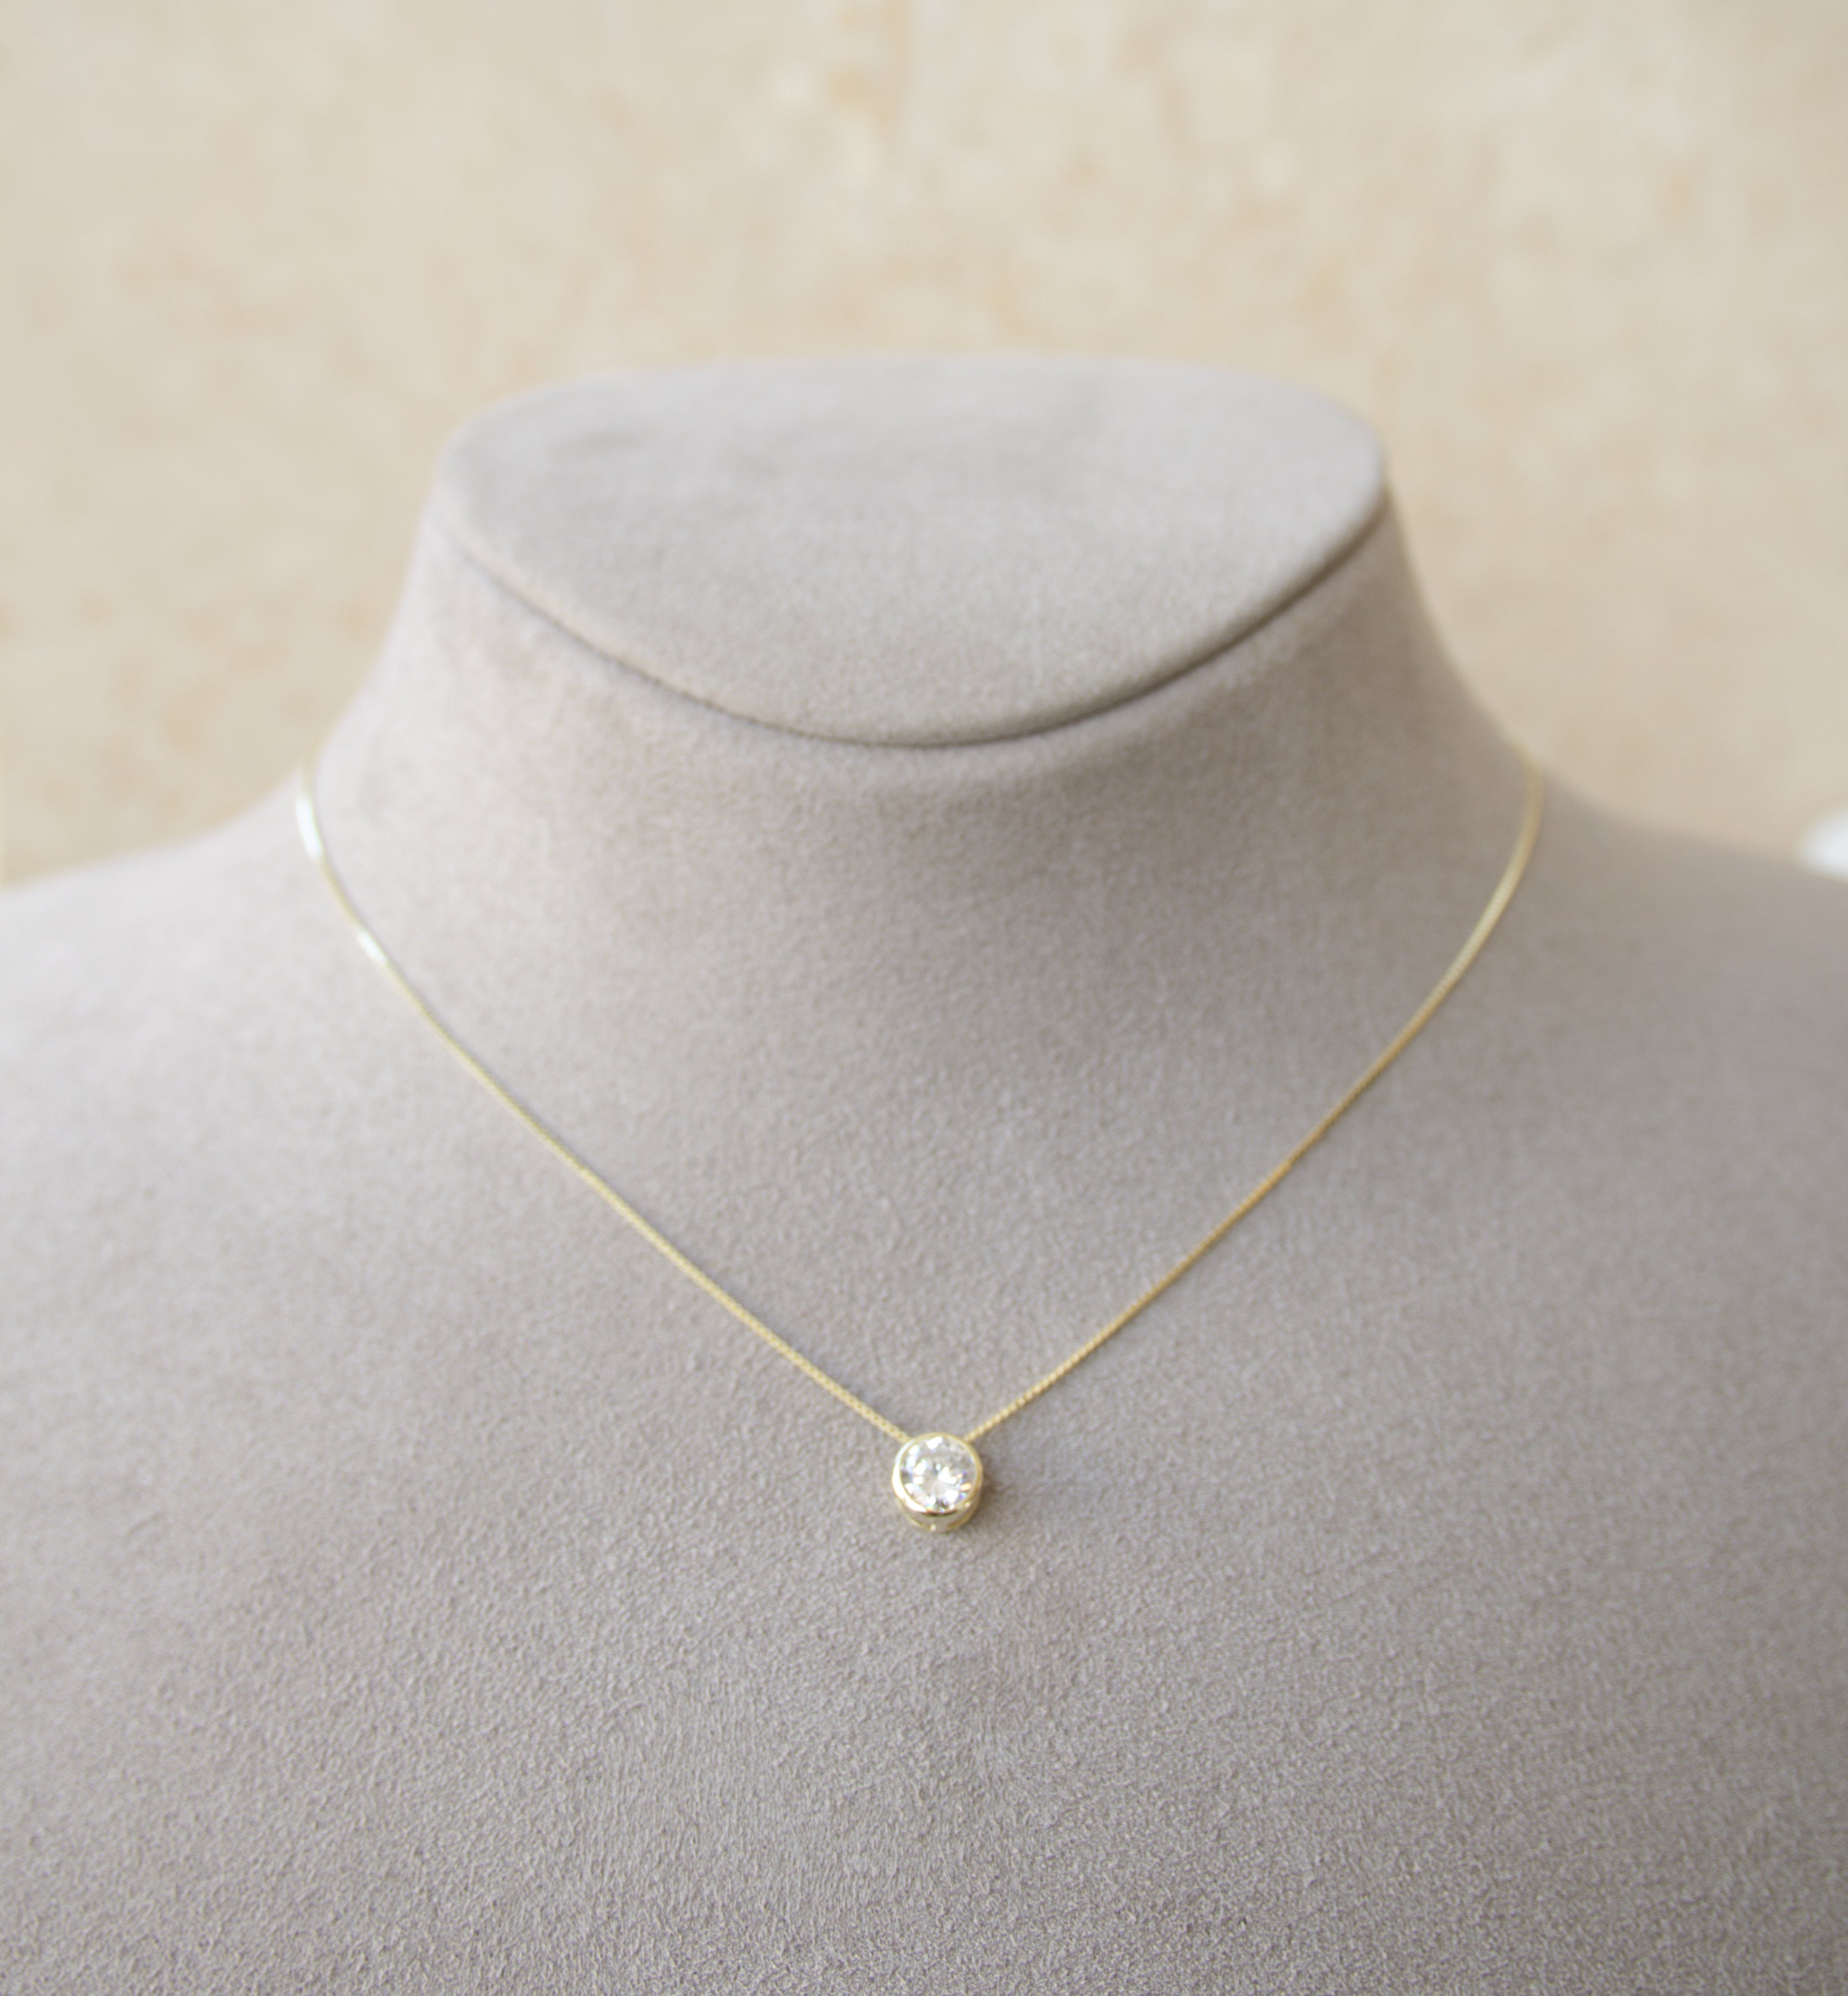 Silver 925 Necklace with Cubic Zircon Stone